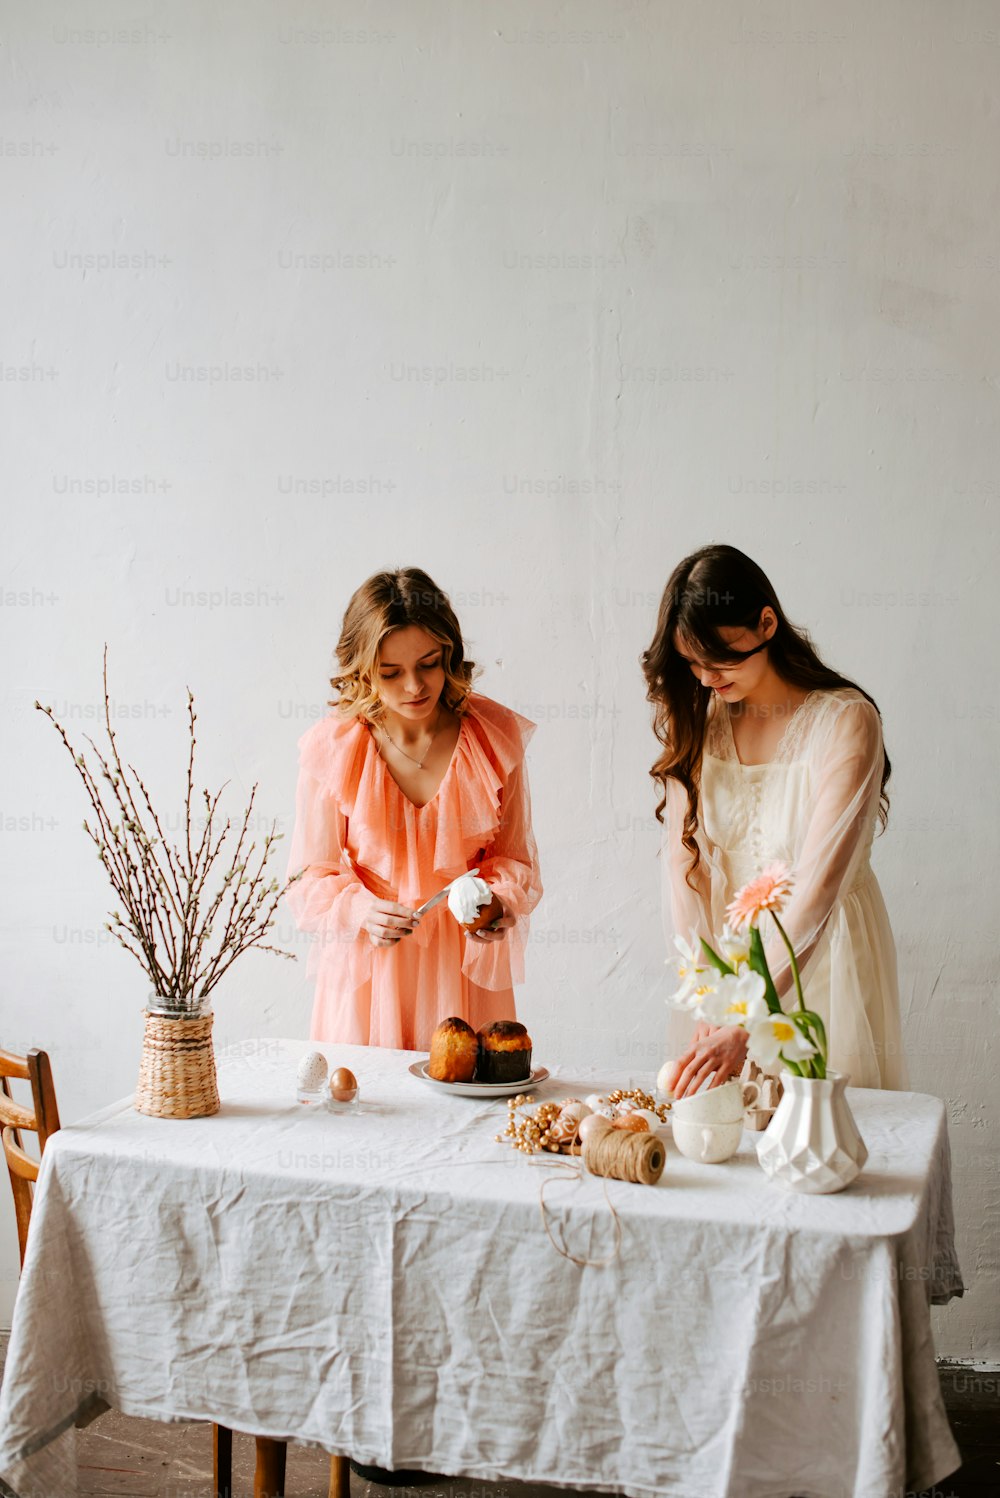 two women standing at a table preparing food